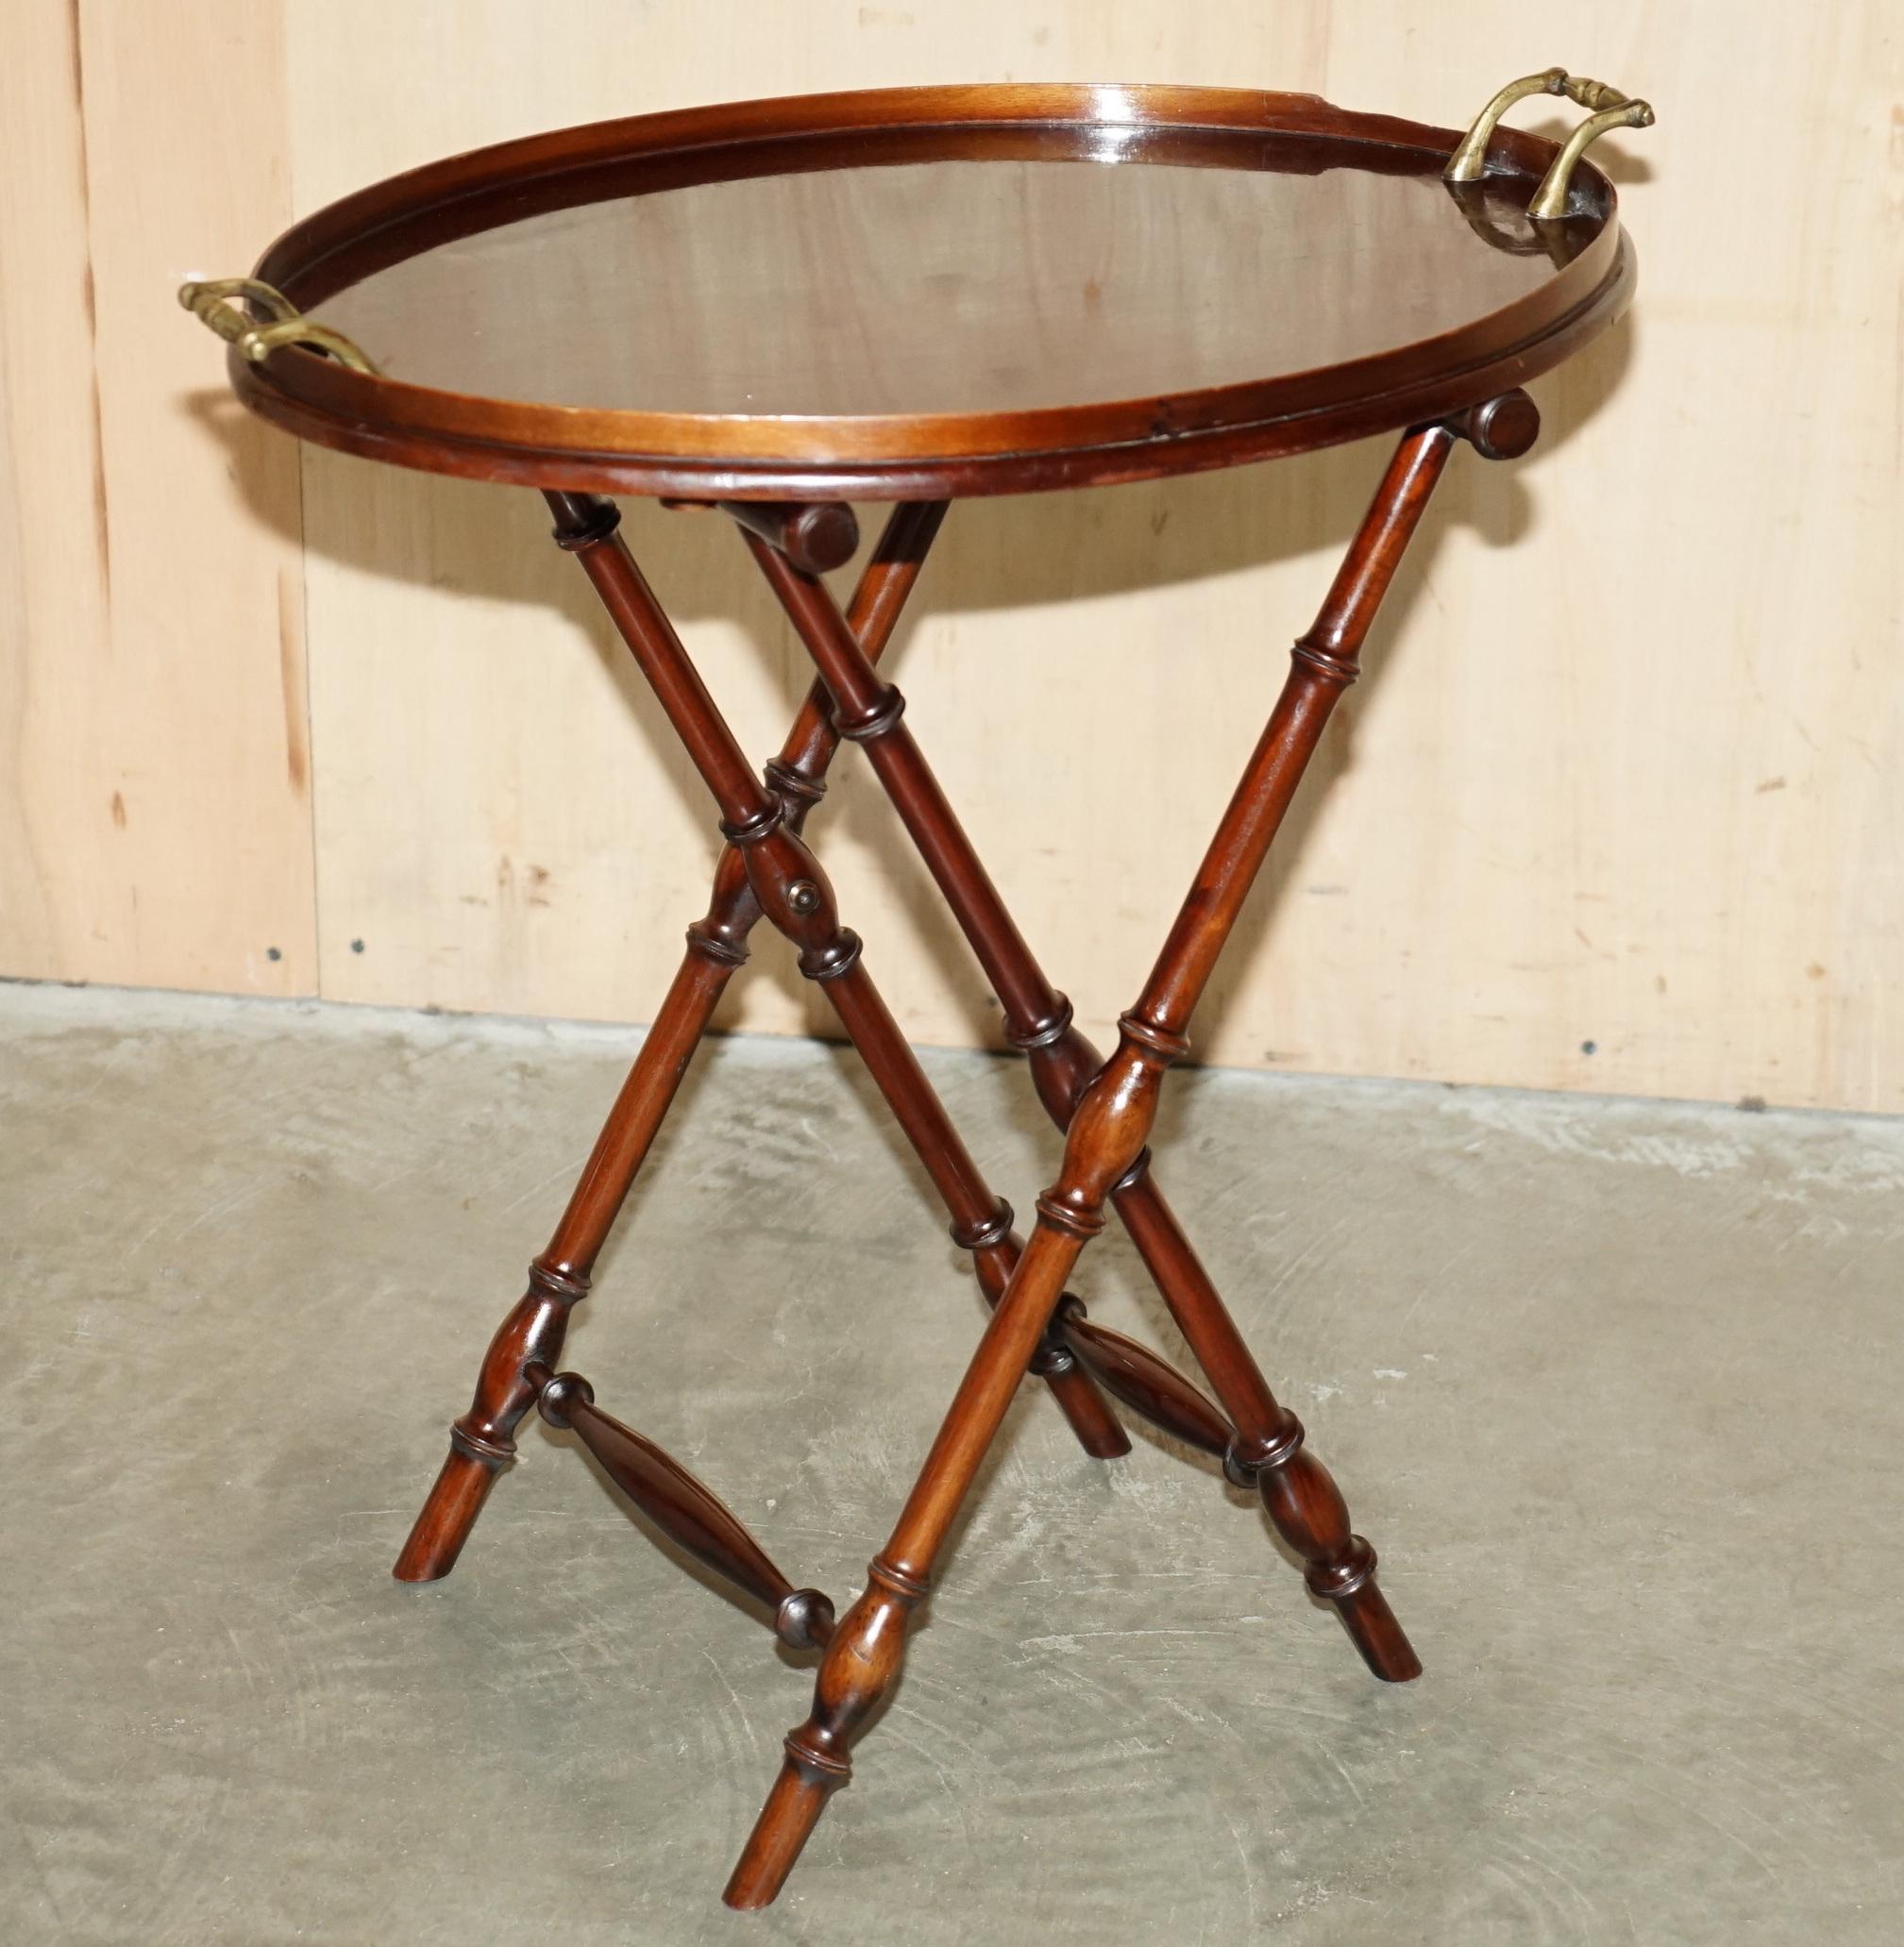 Royal House Antiques

Royal House Antiques is delighted to offer for sale this very well made Antique circa 1880 Victorian Mahogany with brass handles Famboo framed tray table 

Please note the delivery fee listed is just a guide, it covers within